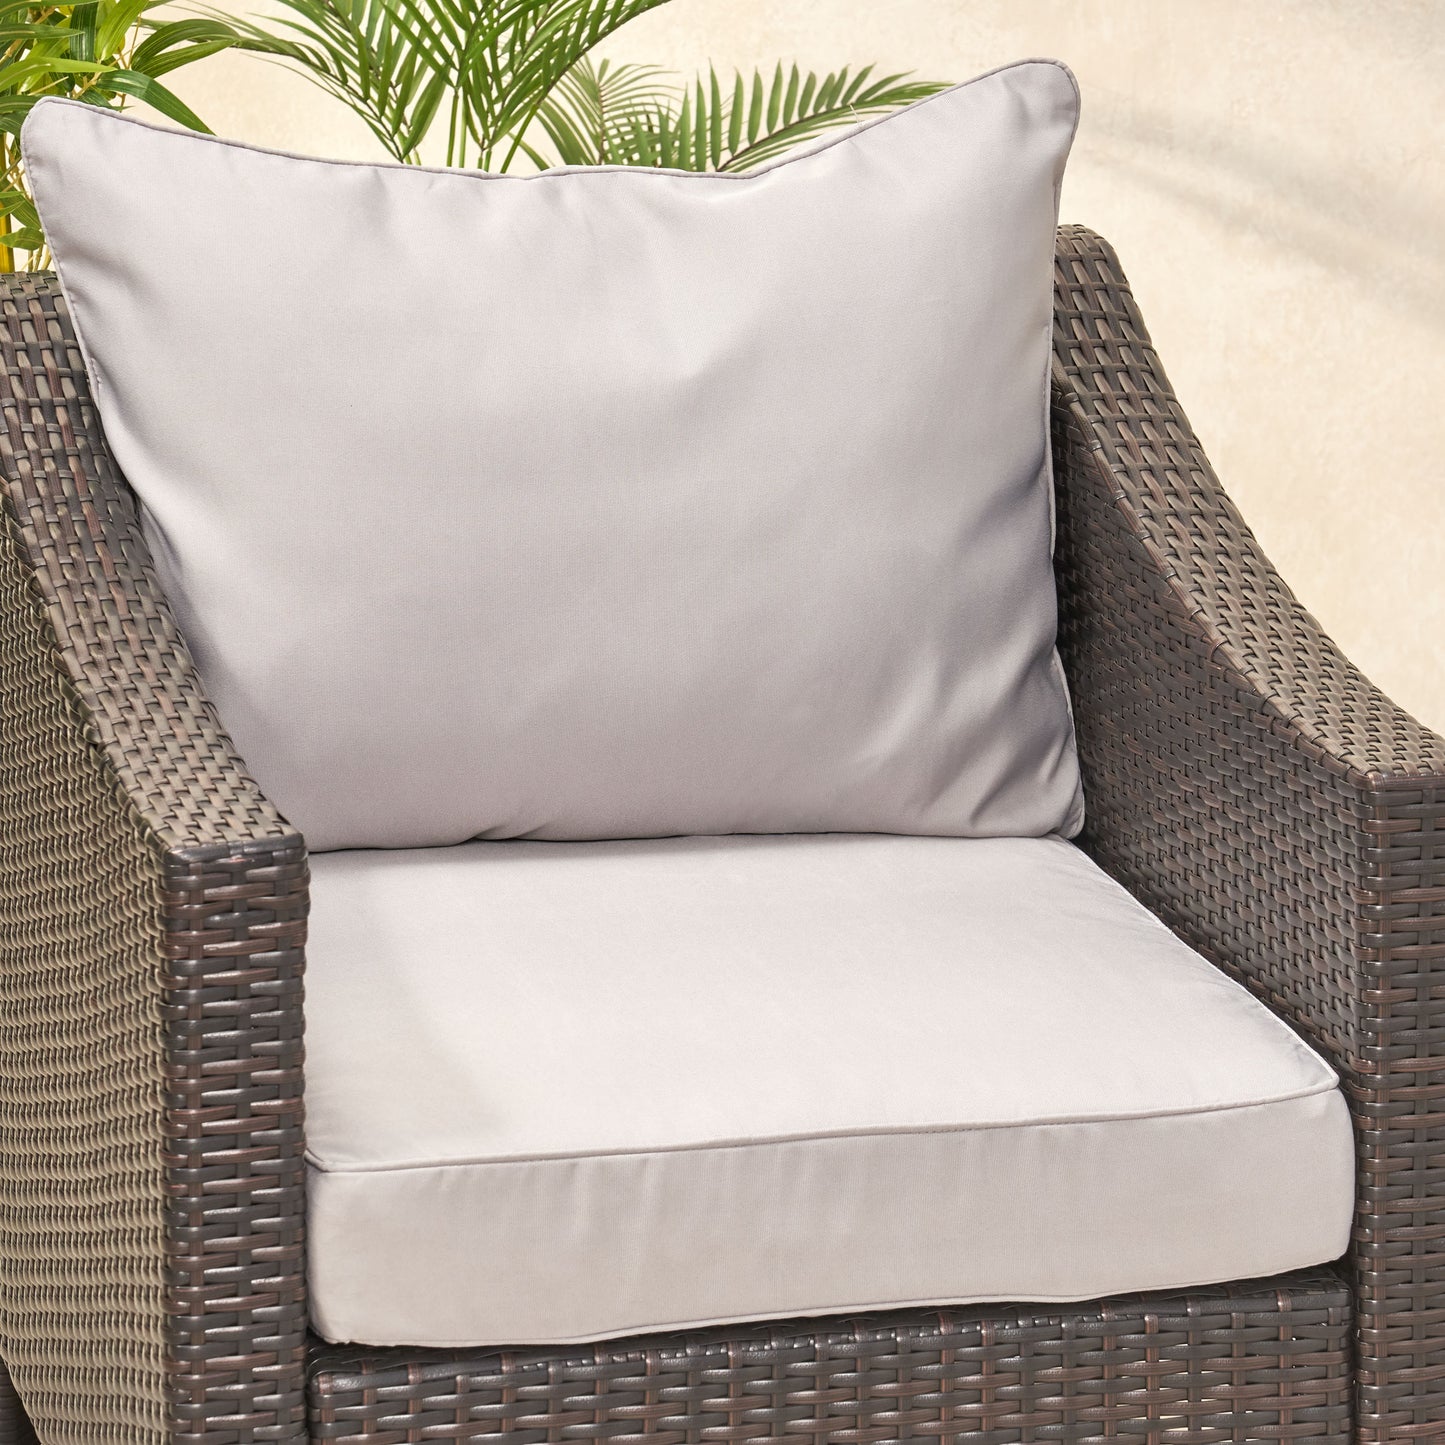 Luciella Outdoor Water Resistant Fabric Club Chair Cushions with Piping